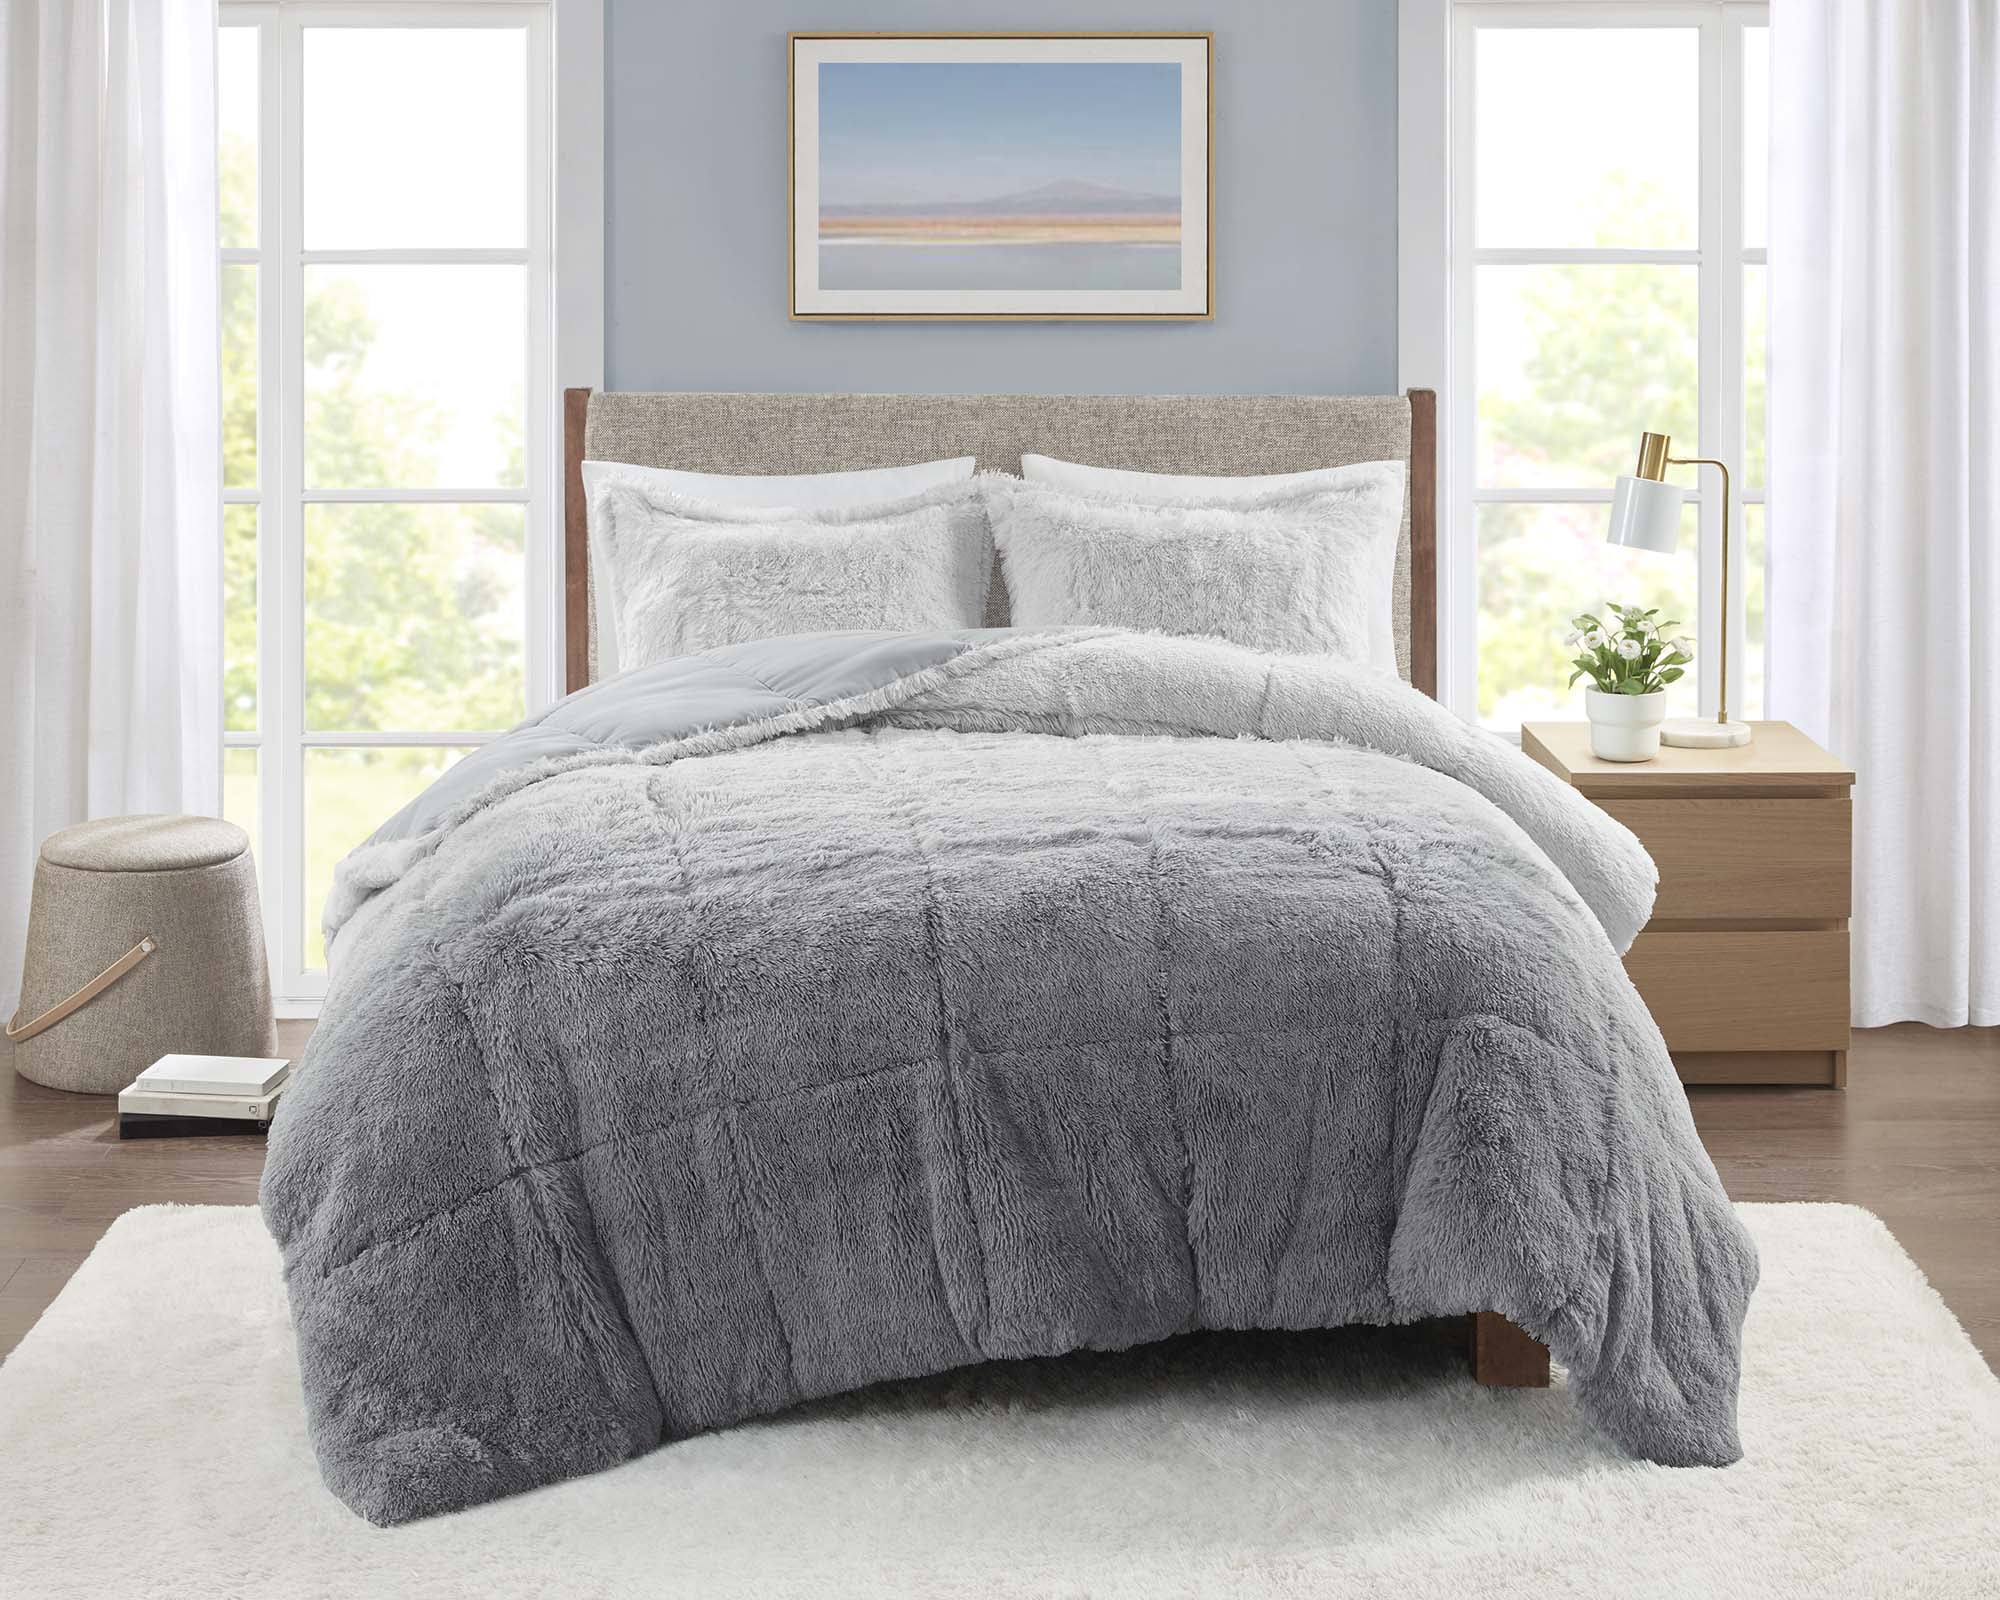 Mainstays Shaggy Faux Fur 3 Piece Grey Comforter Bed Set, Comforter and ...